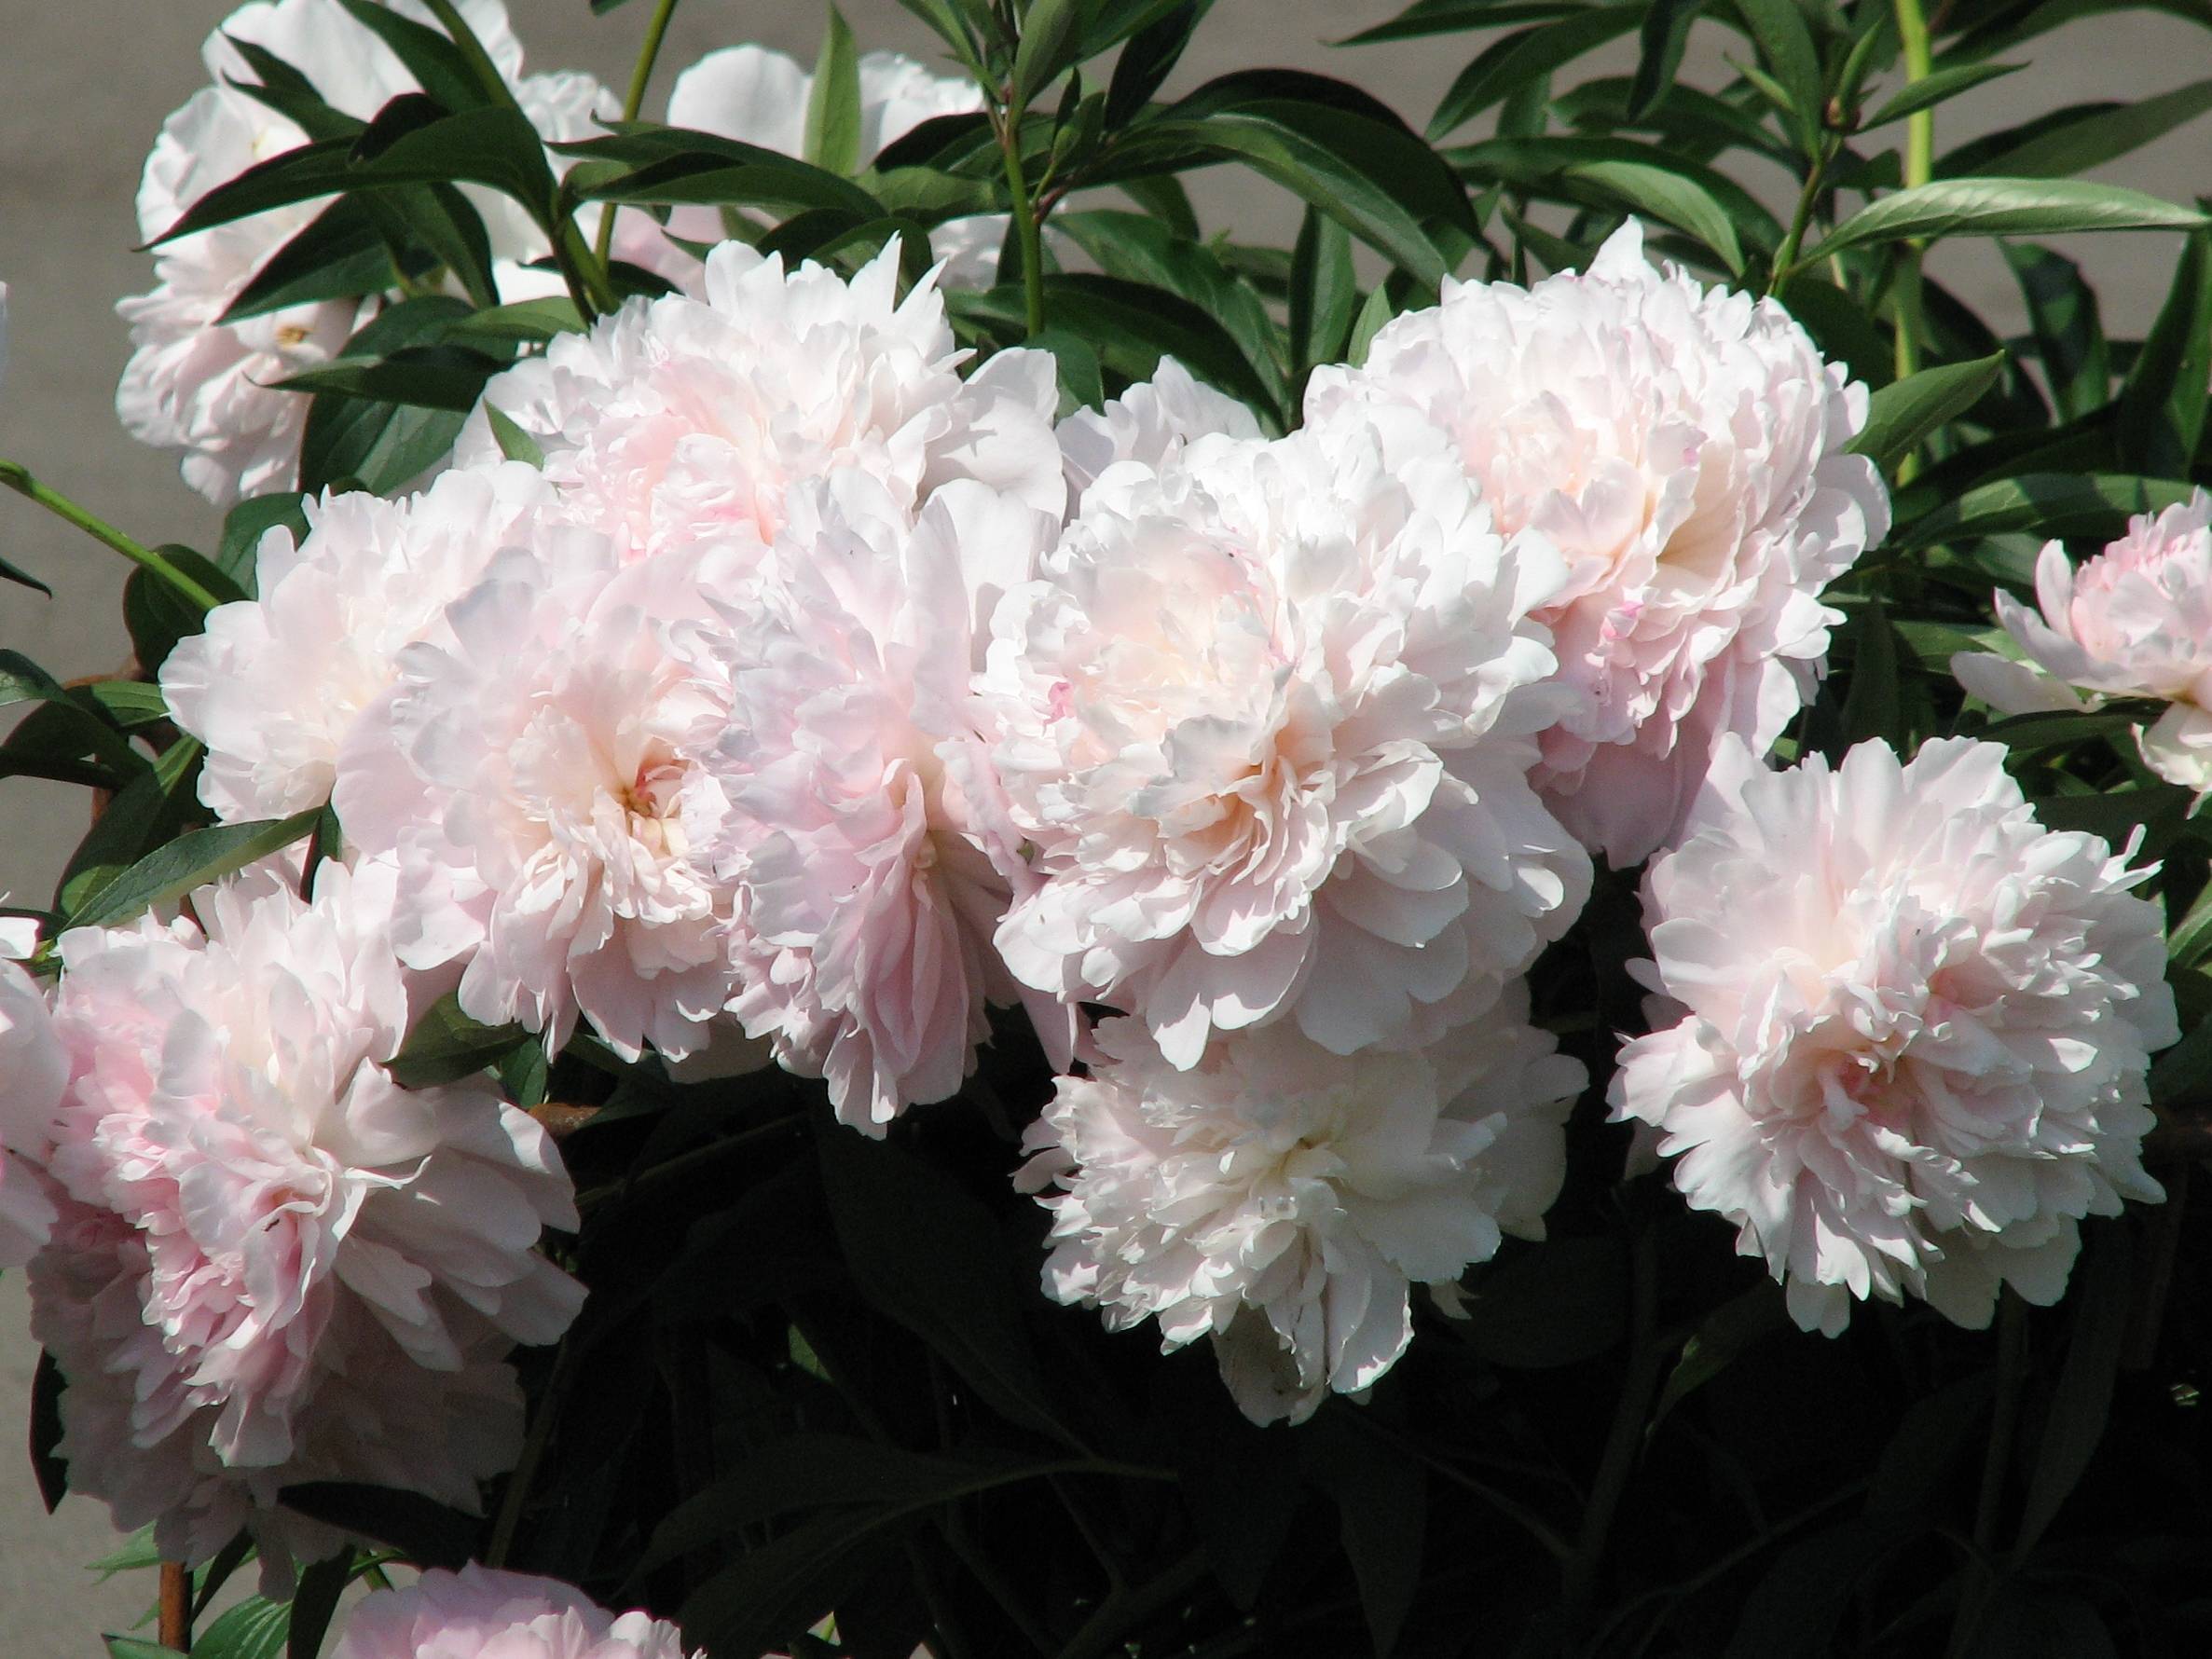 slightly pink to white, ruffled, rose-like flowers with multiple layers, dark-green, glossy, lanceolate leaves, and dark-green stems